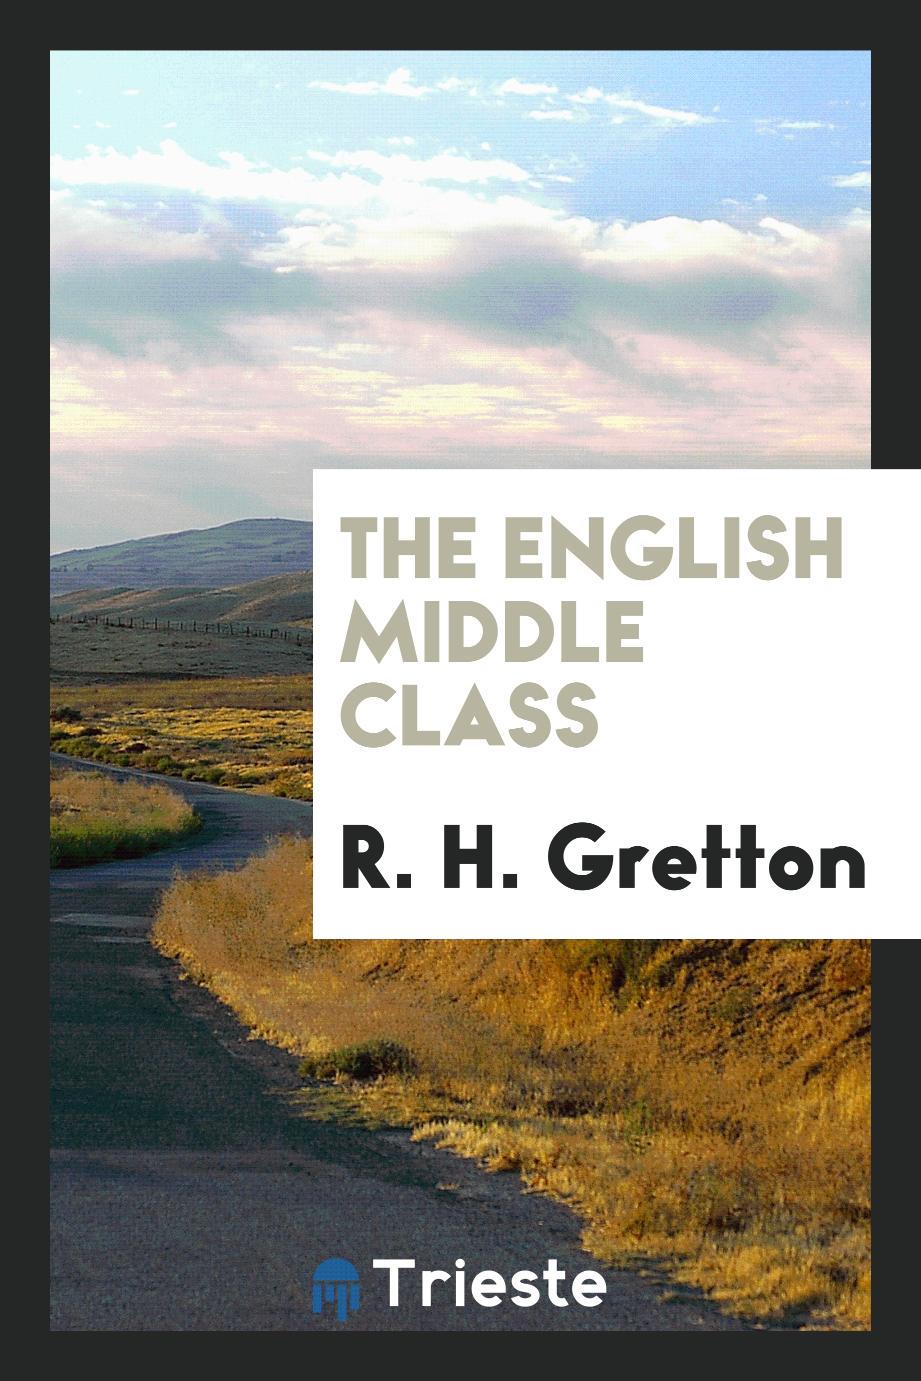 The English middle class